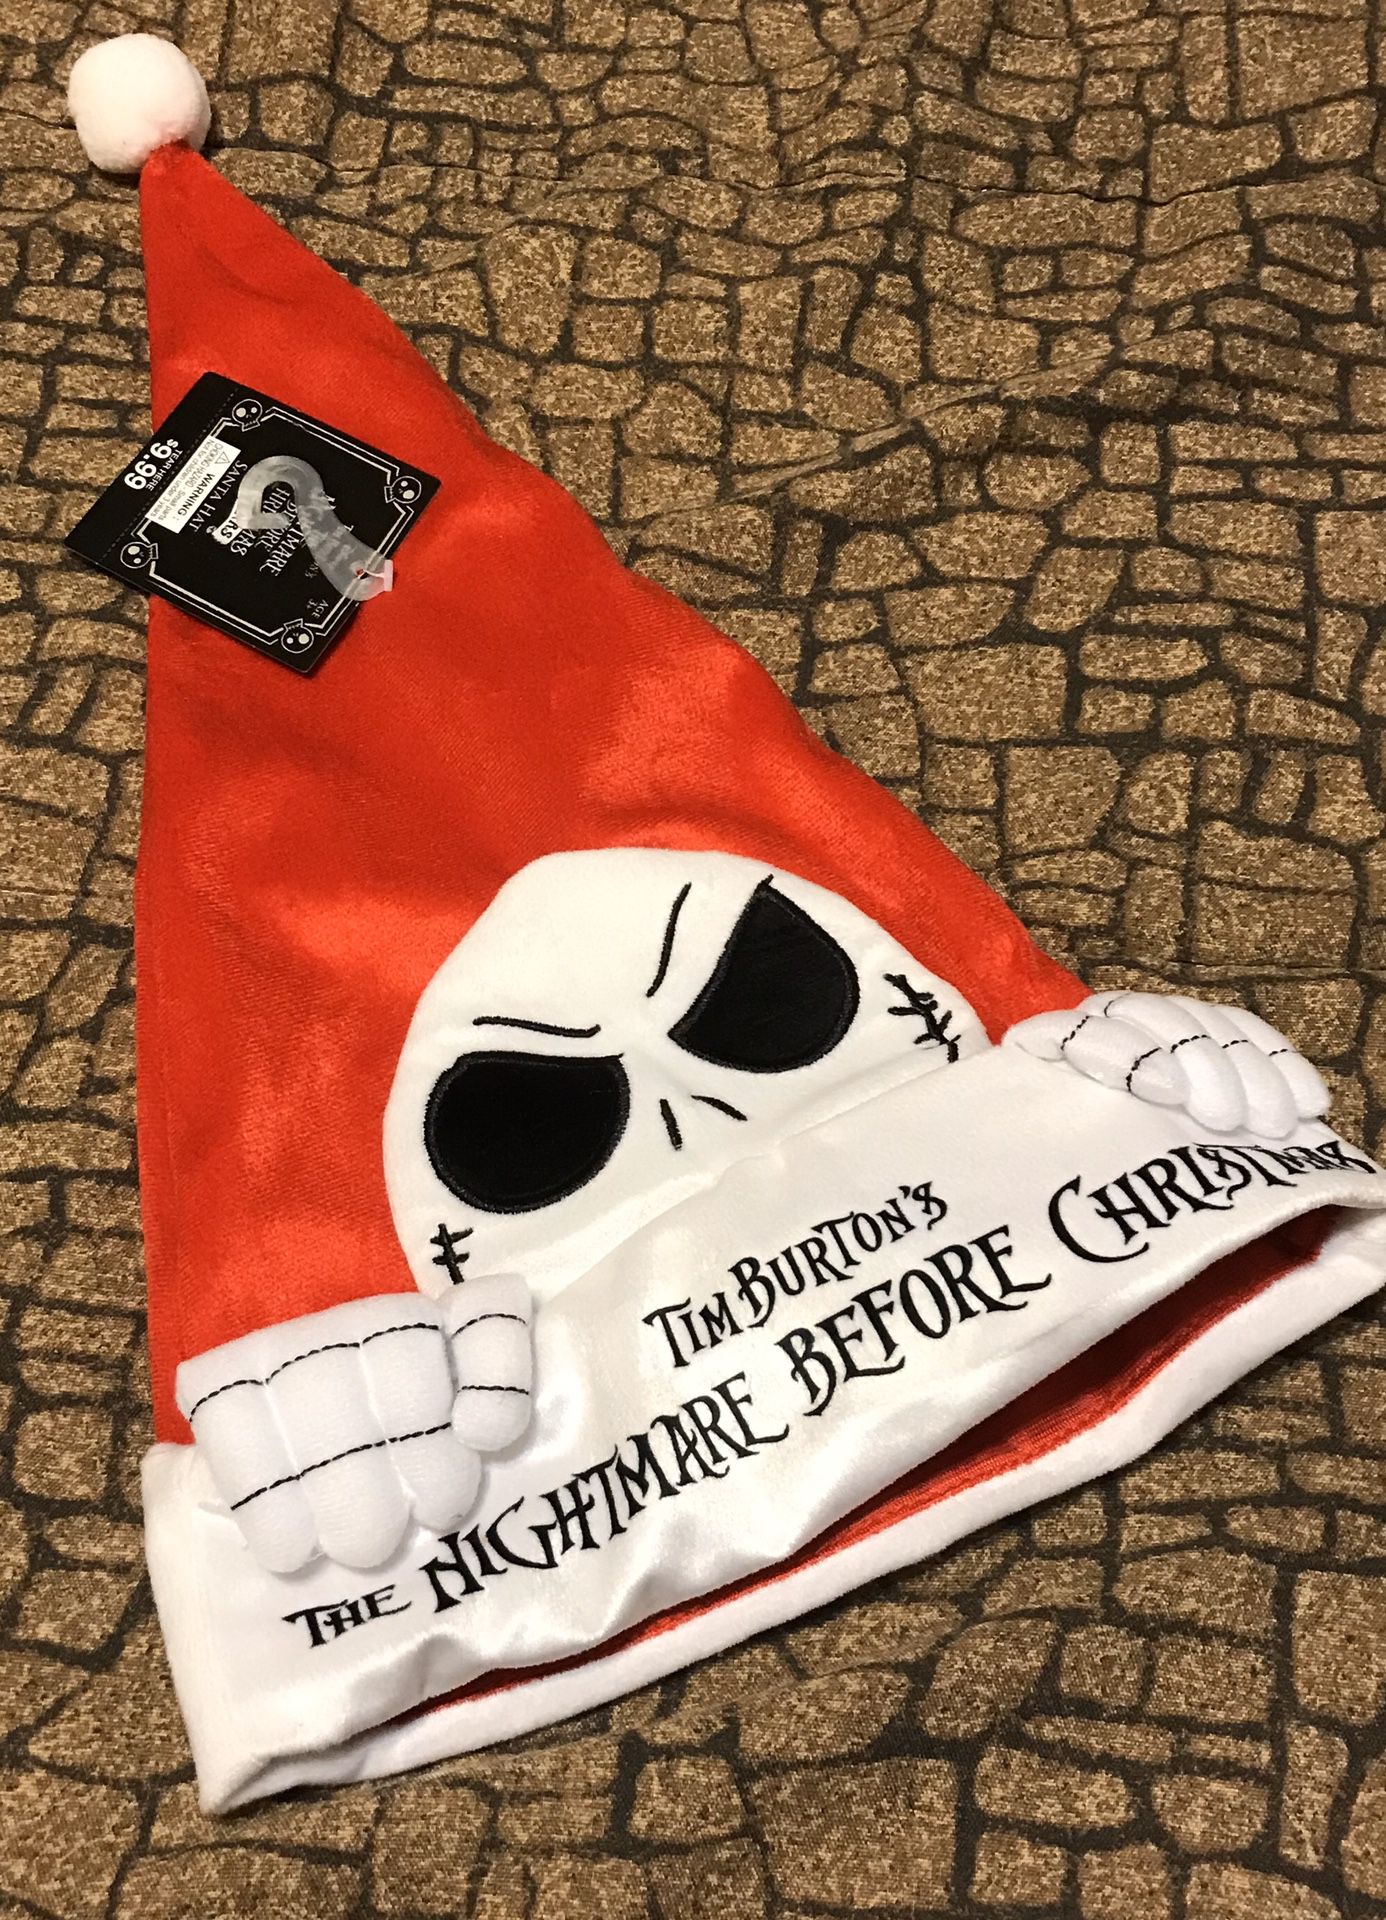 The nightmare before Christmas hat